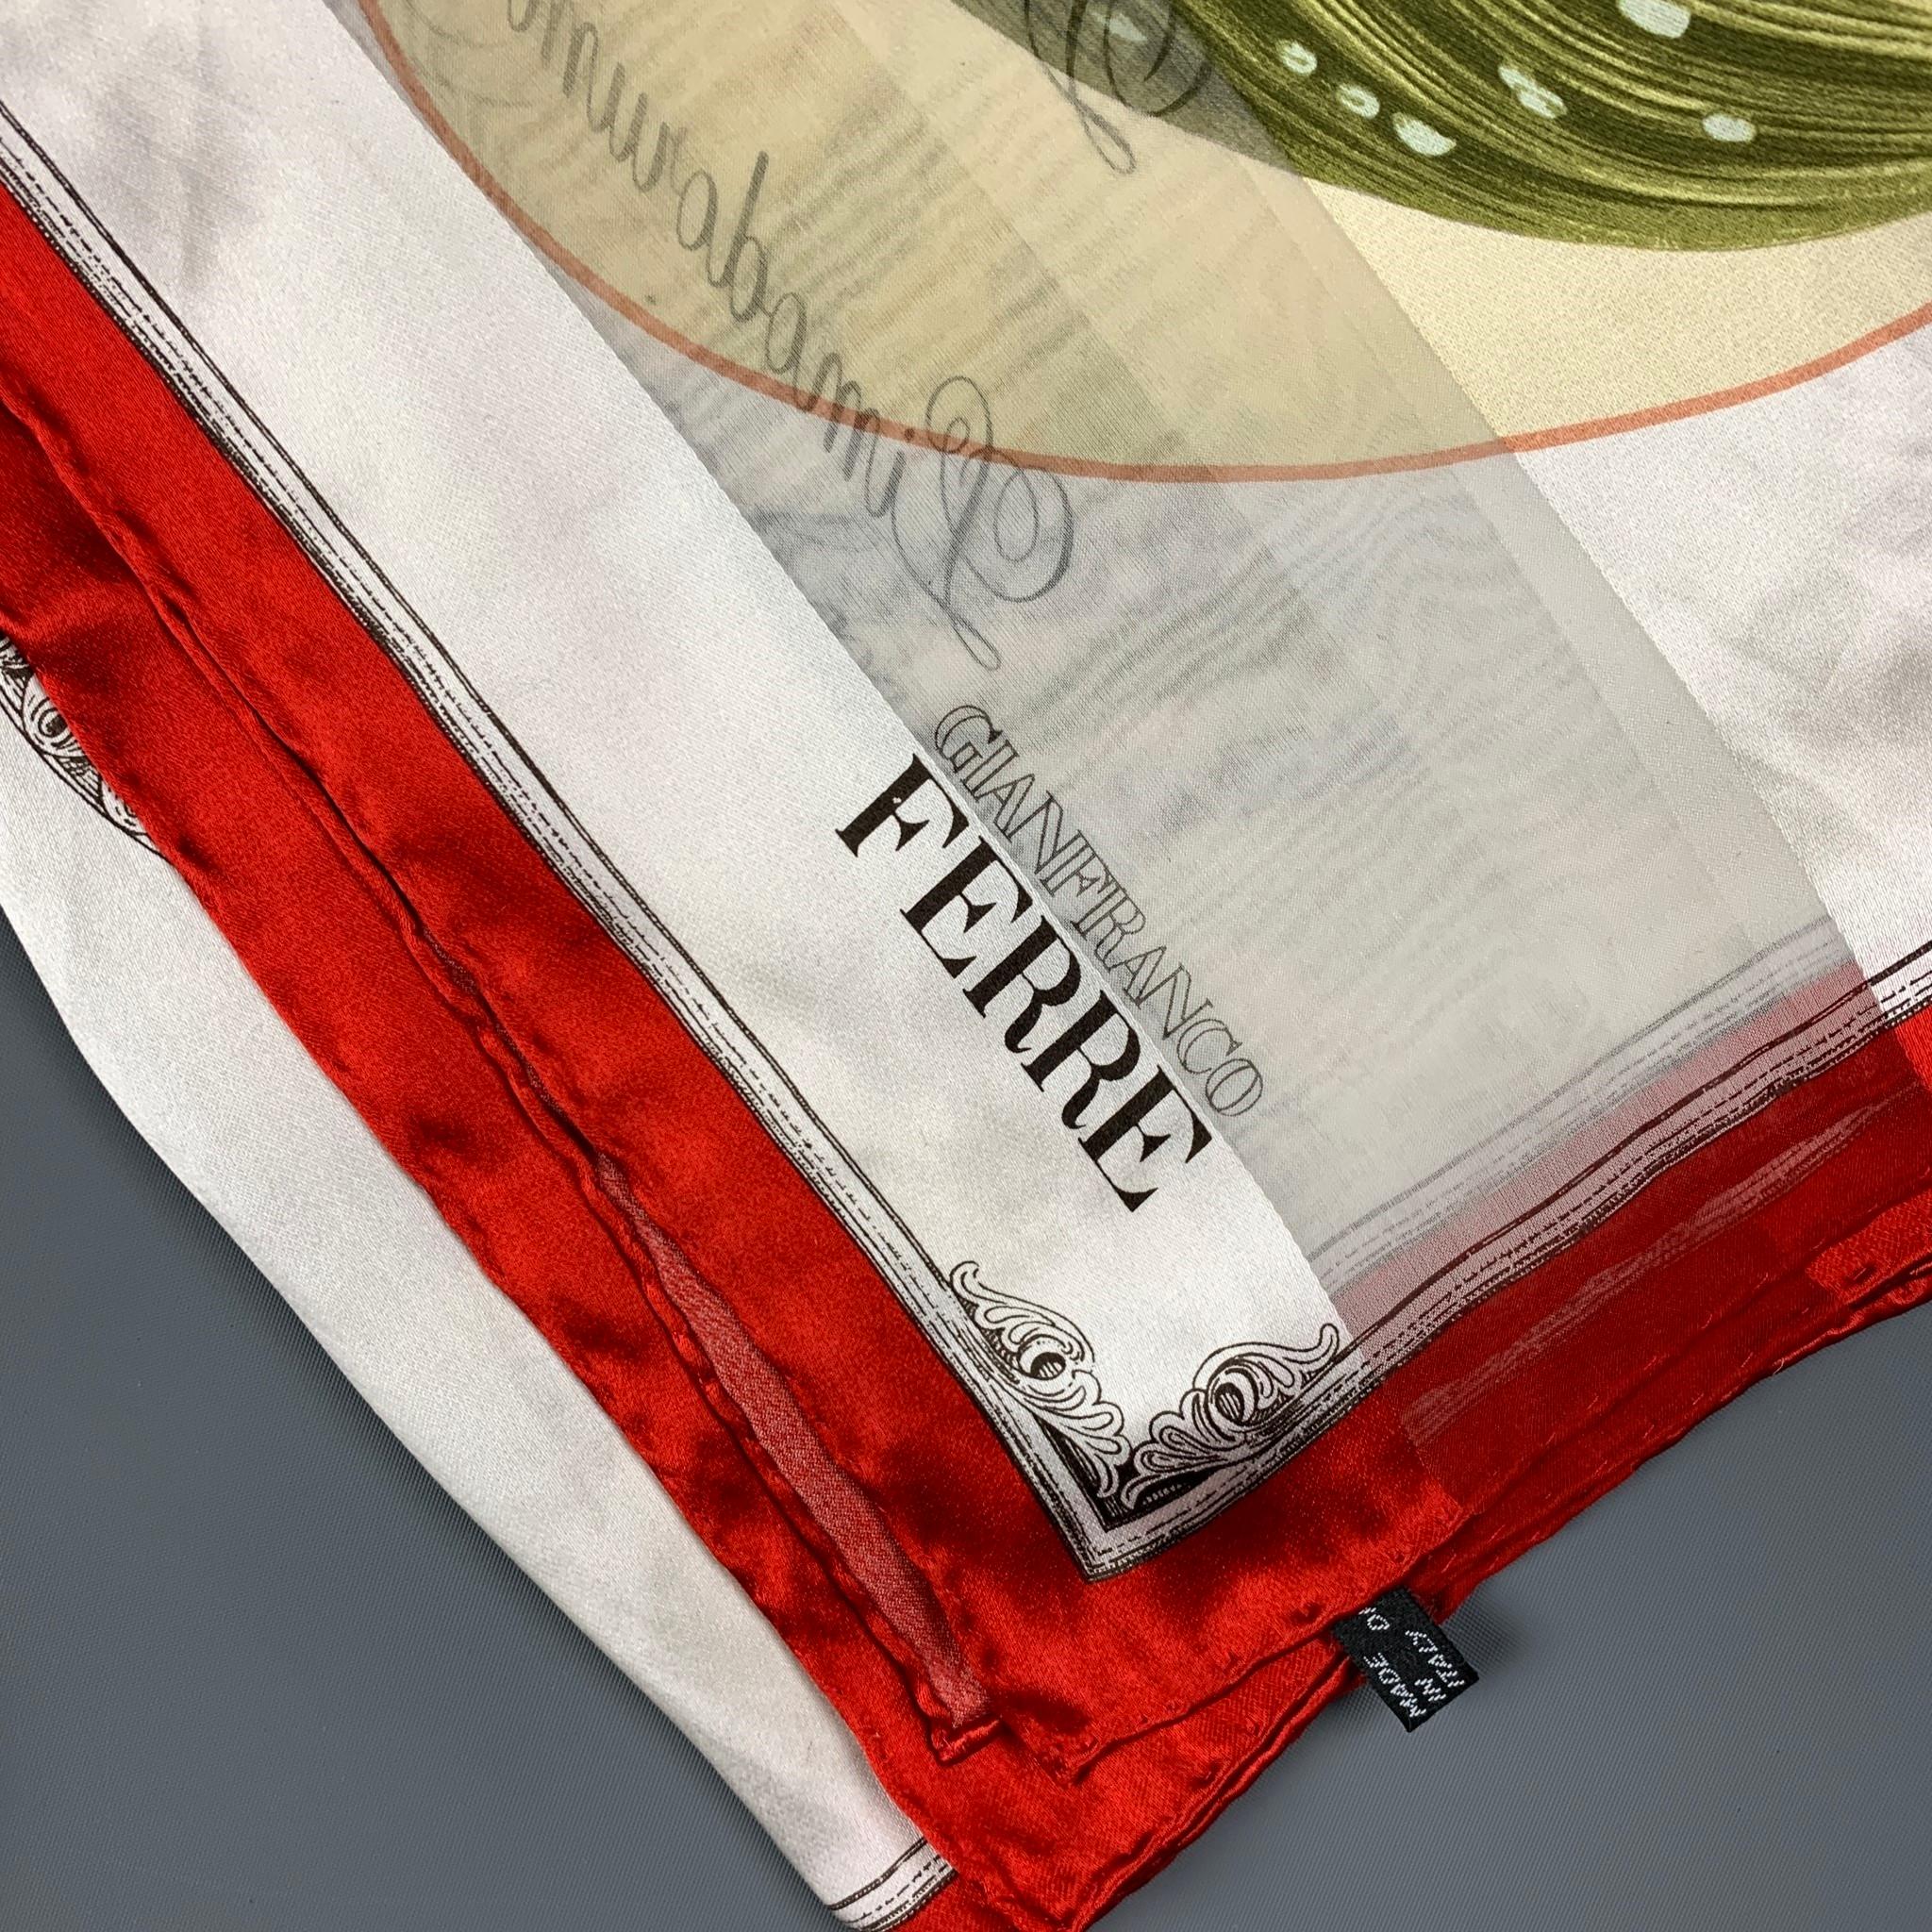 GIANFRANCO FERRE scarf comes in a white & red botanical floral silk featuring a oversized style. Made in Italy. 

Very Good Pre-Owned Condition.

Measurements:

70 in. x 33.5 in. 